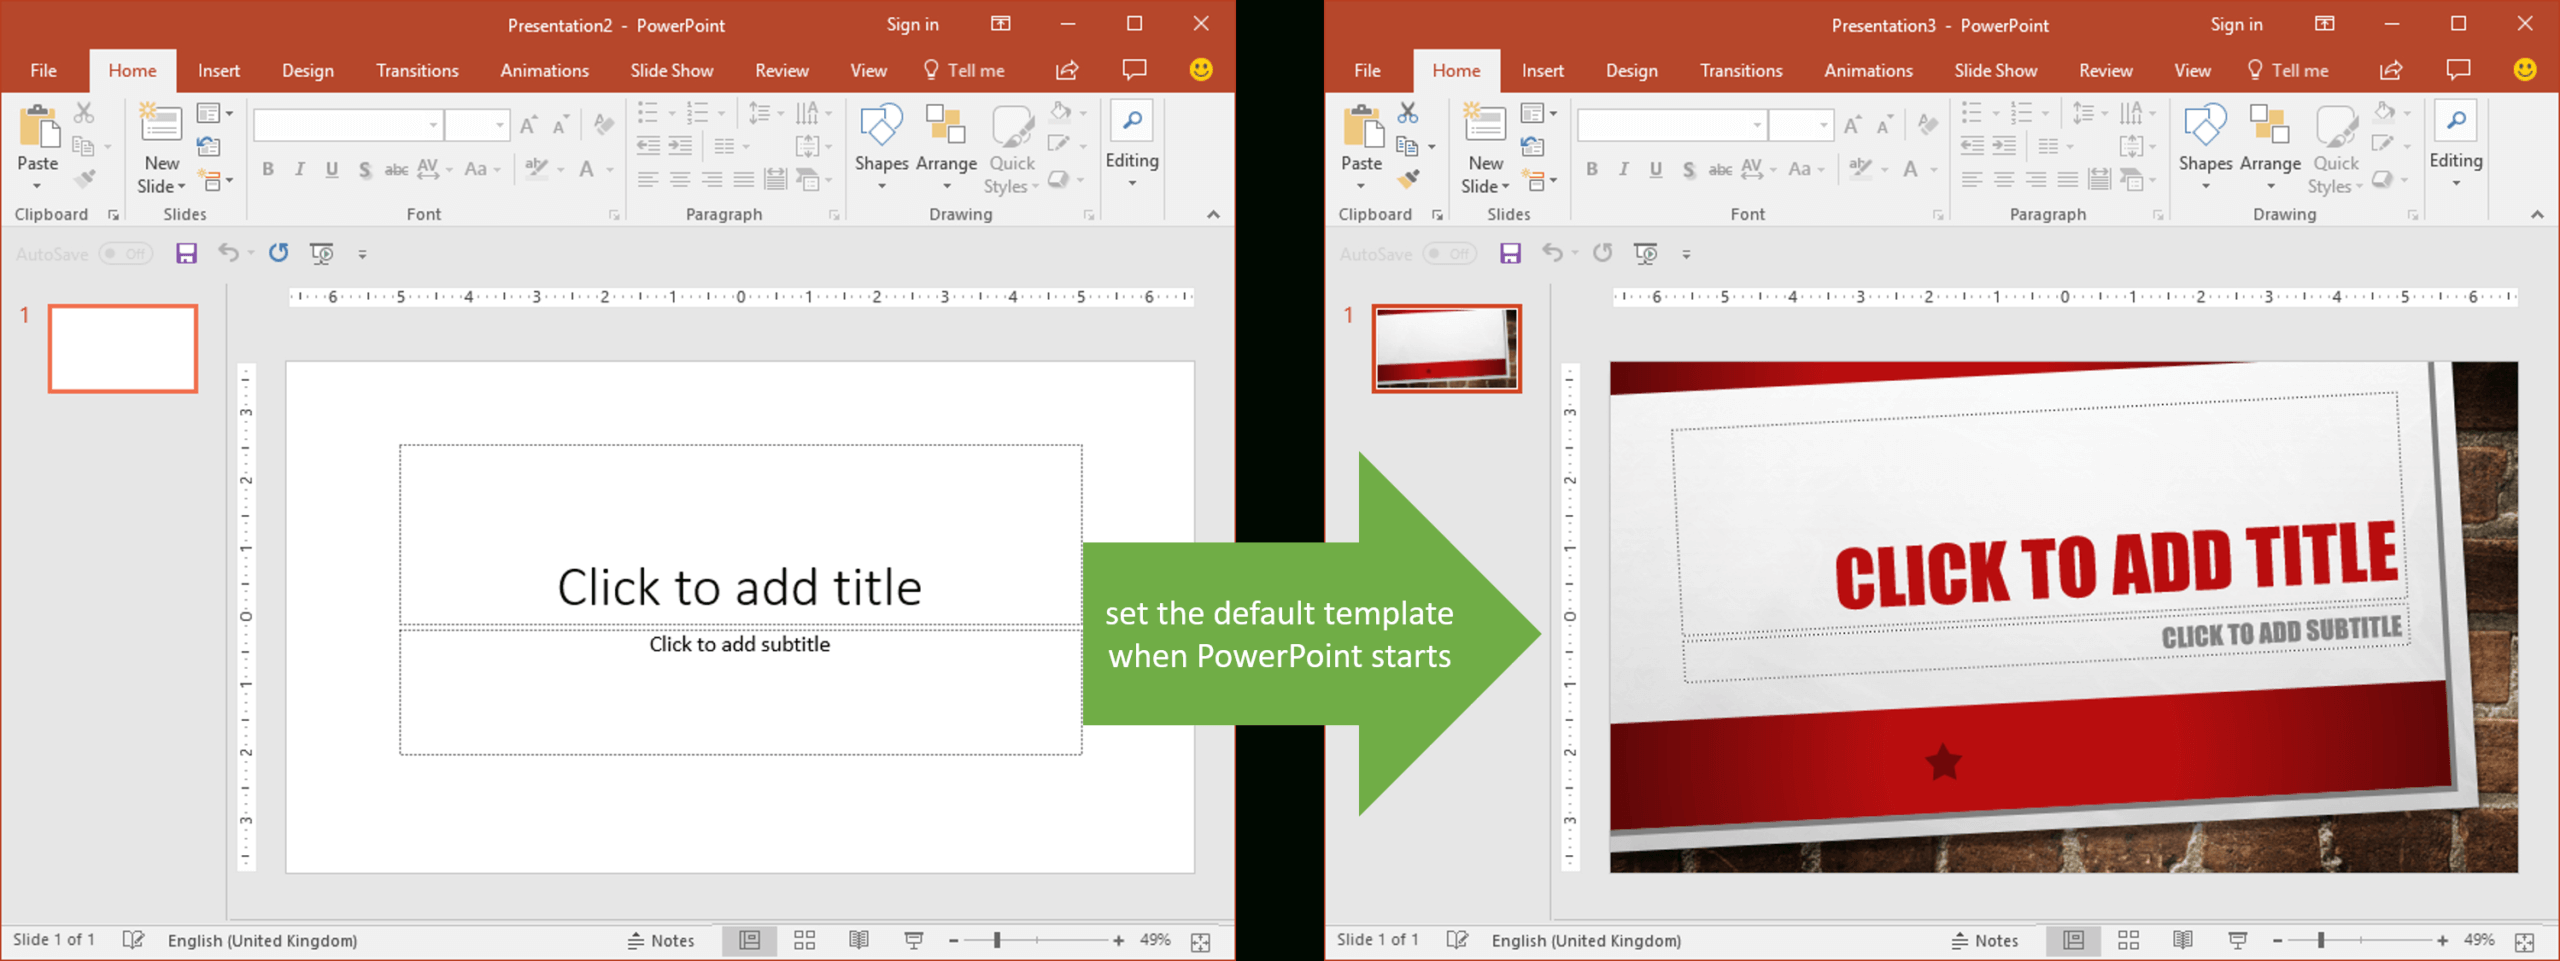 Set The Default Template When Powerpoint Starts | Youpresent Throughout Where Are Powerpoint Templates Stored